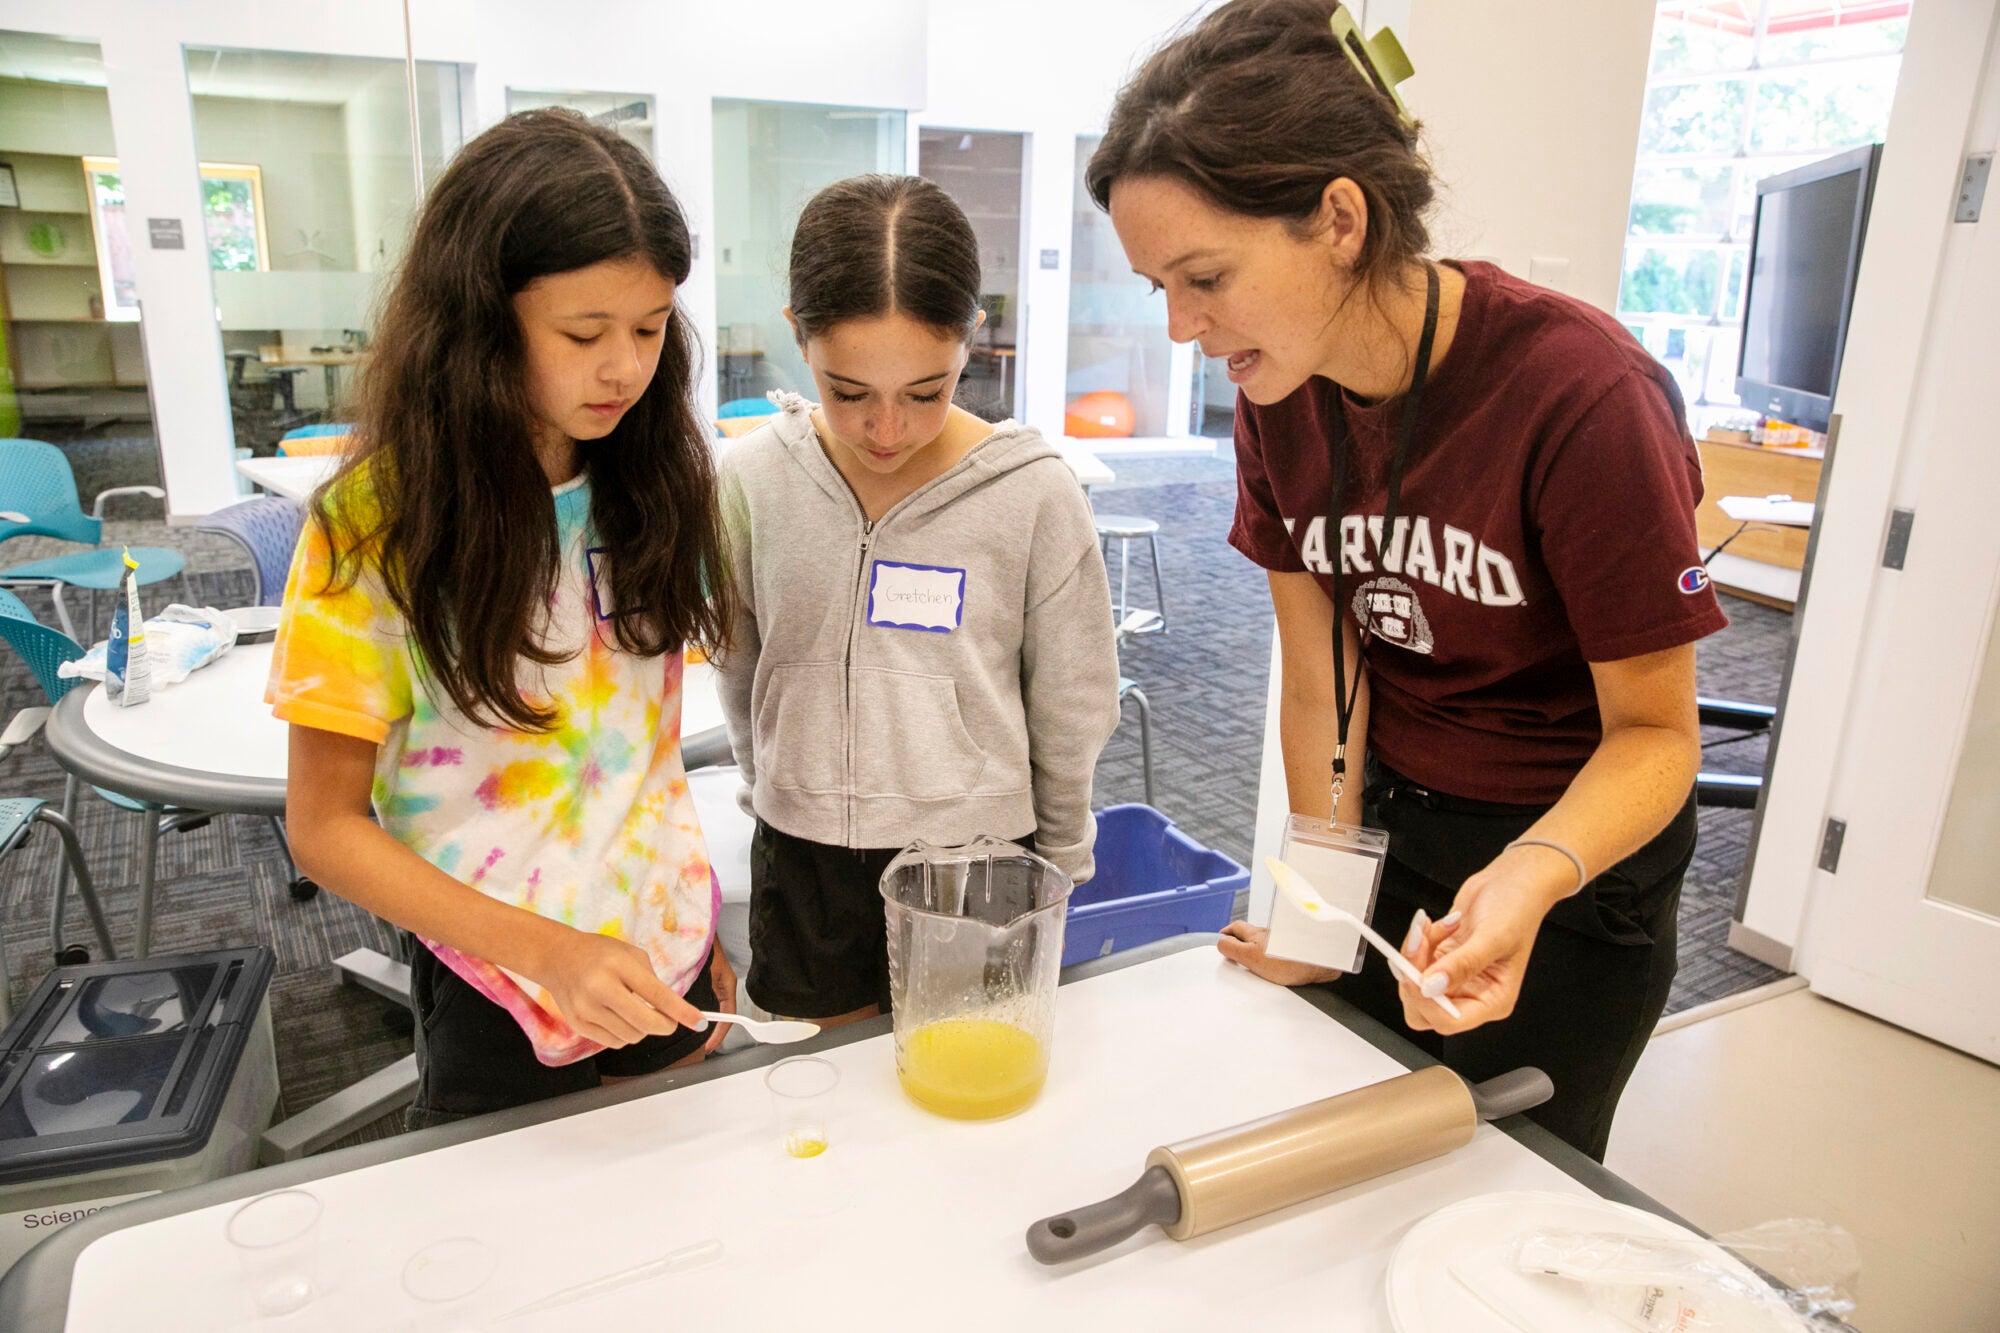 A Harvard student helps two local middle schools in a cooking class